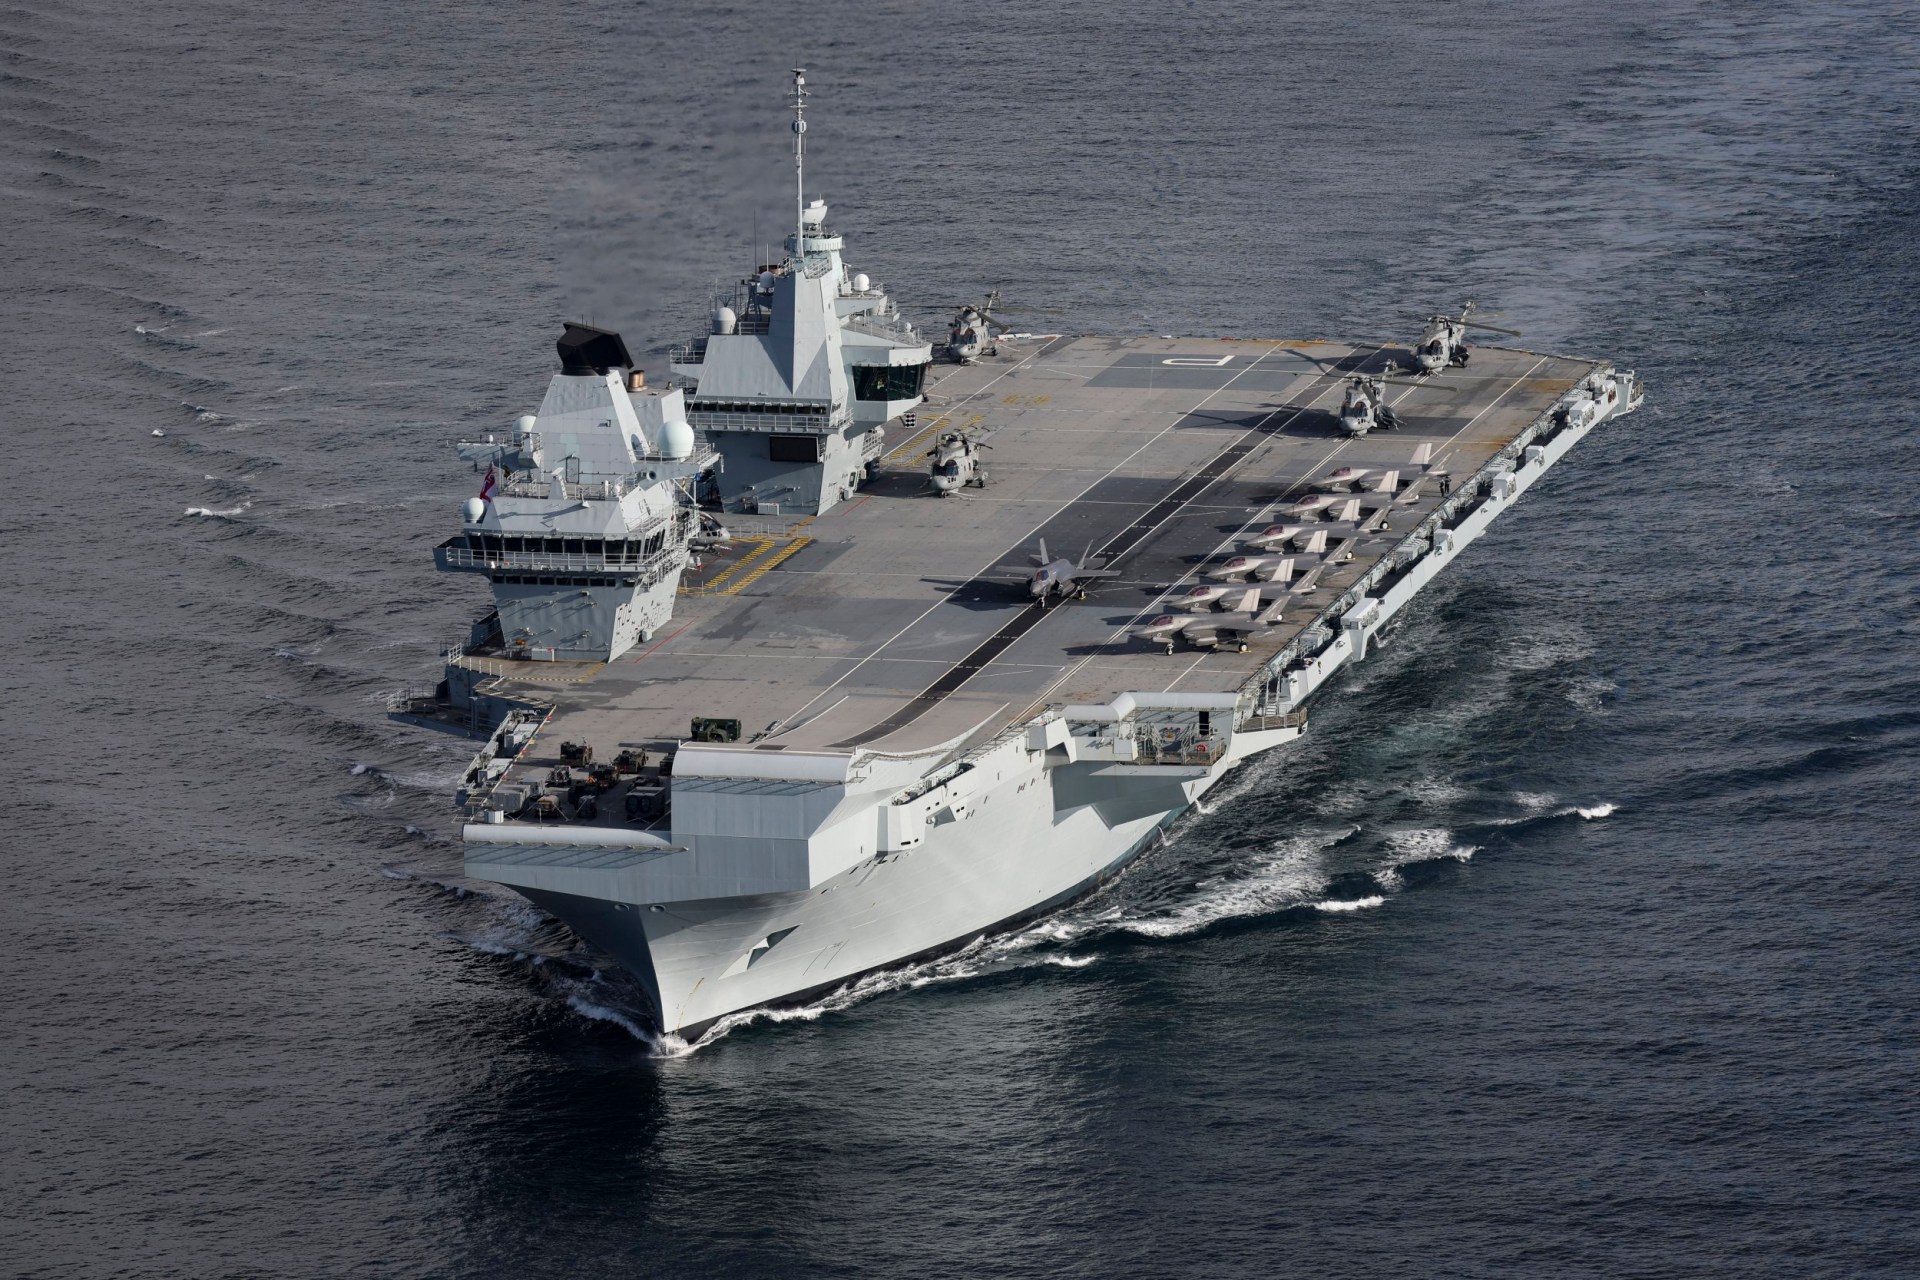 navy might have to sell off £3,500,000,000 hms prince of wales aircraft carrier